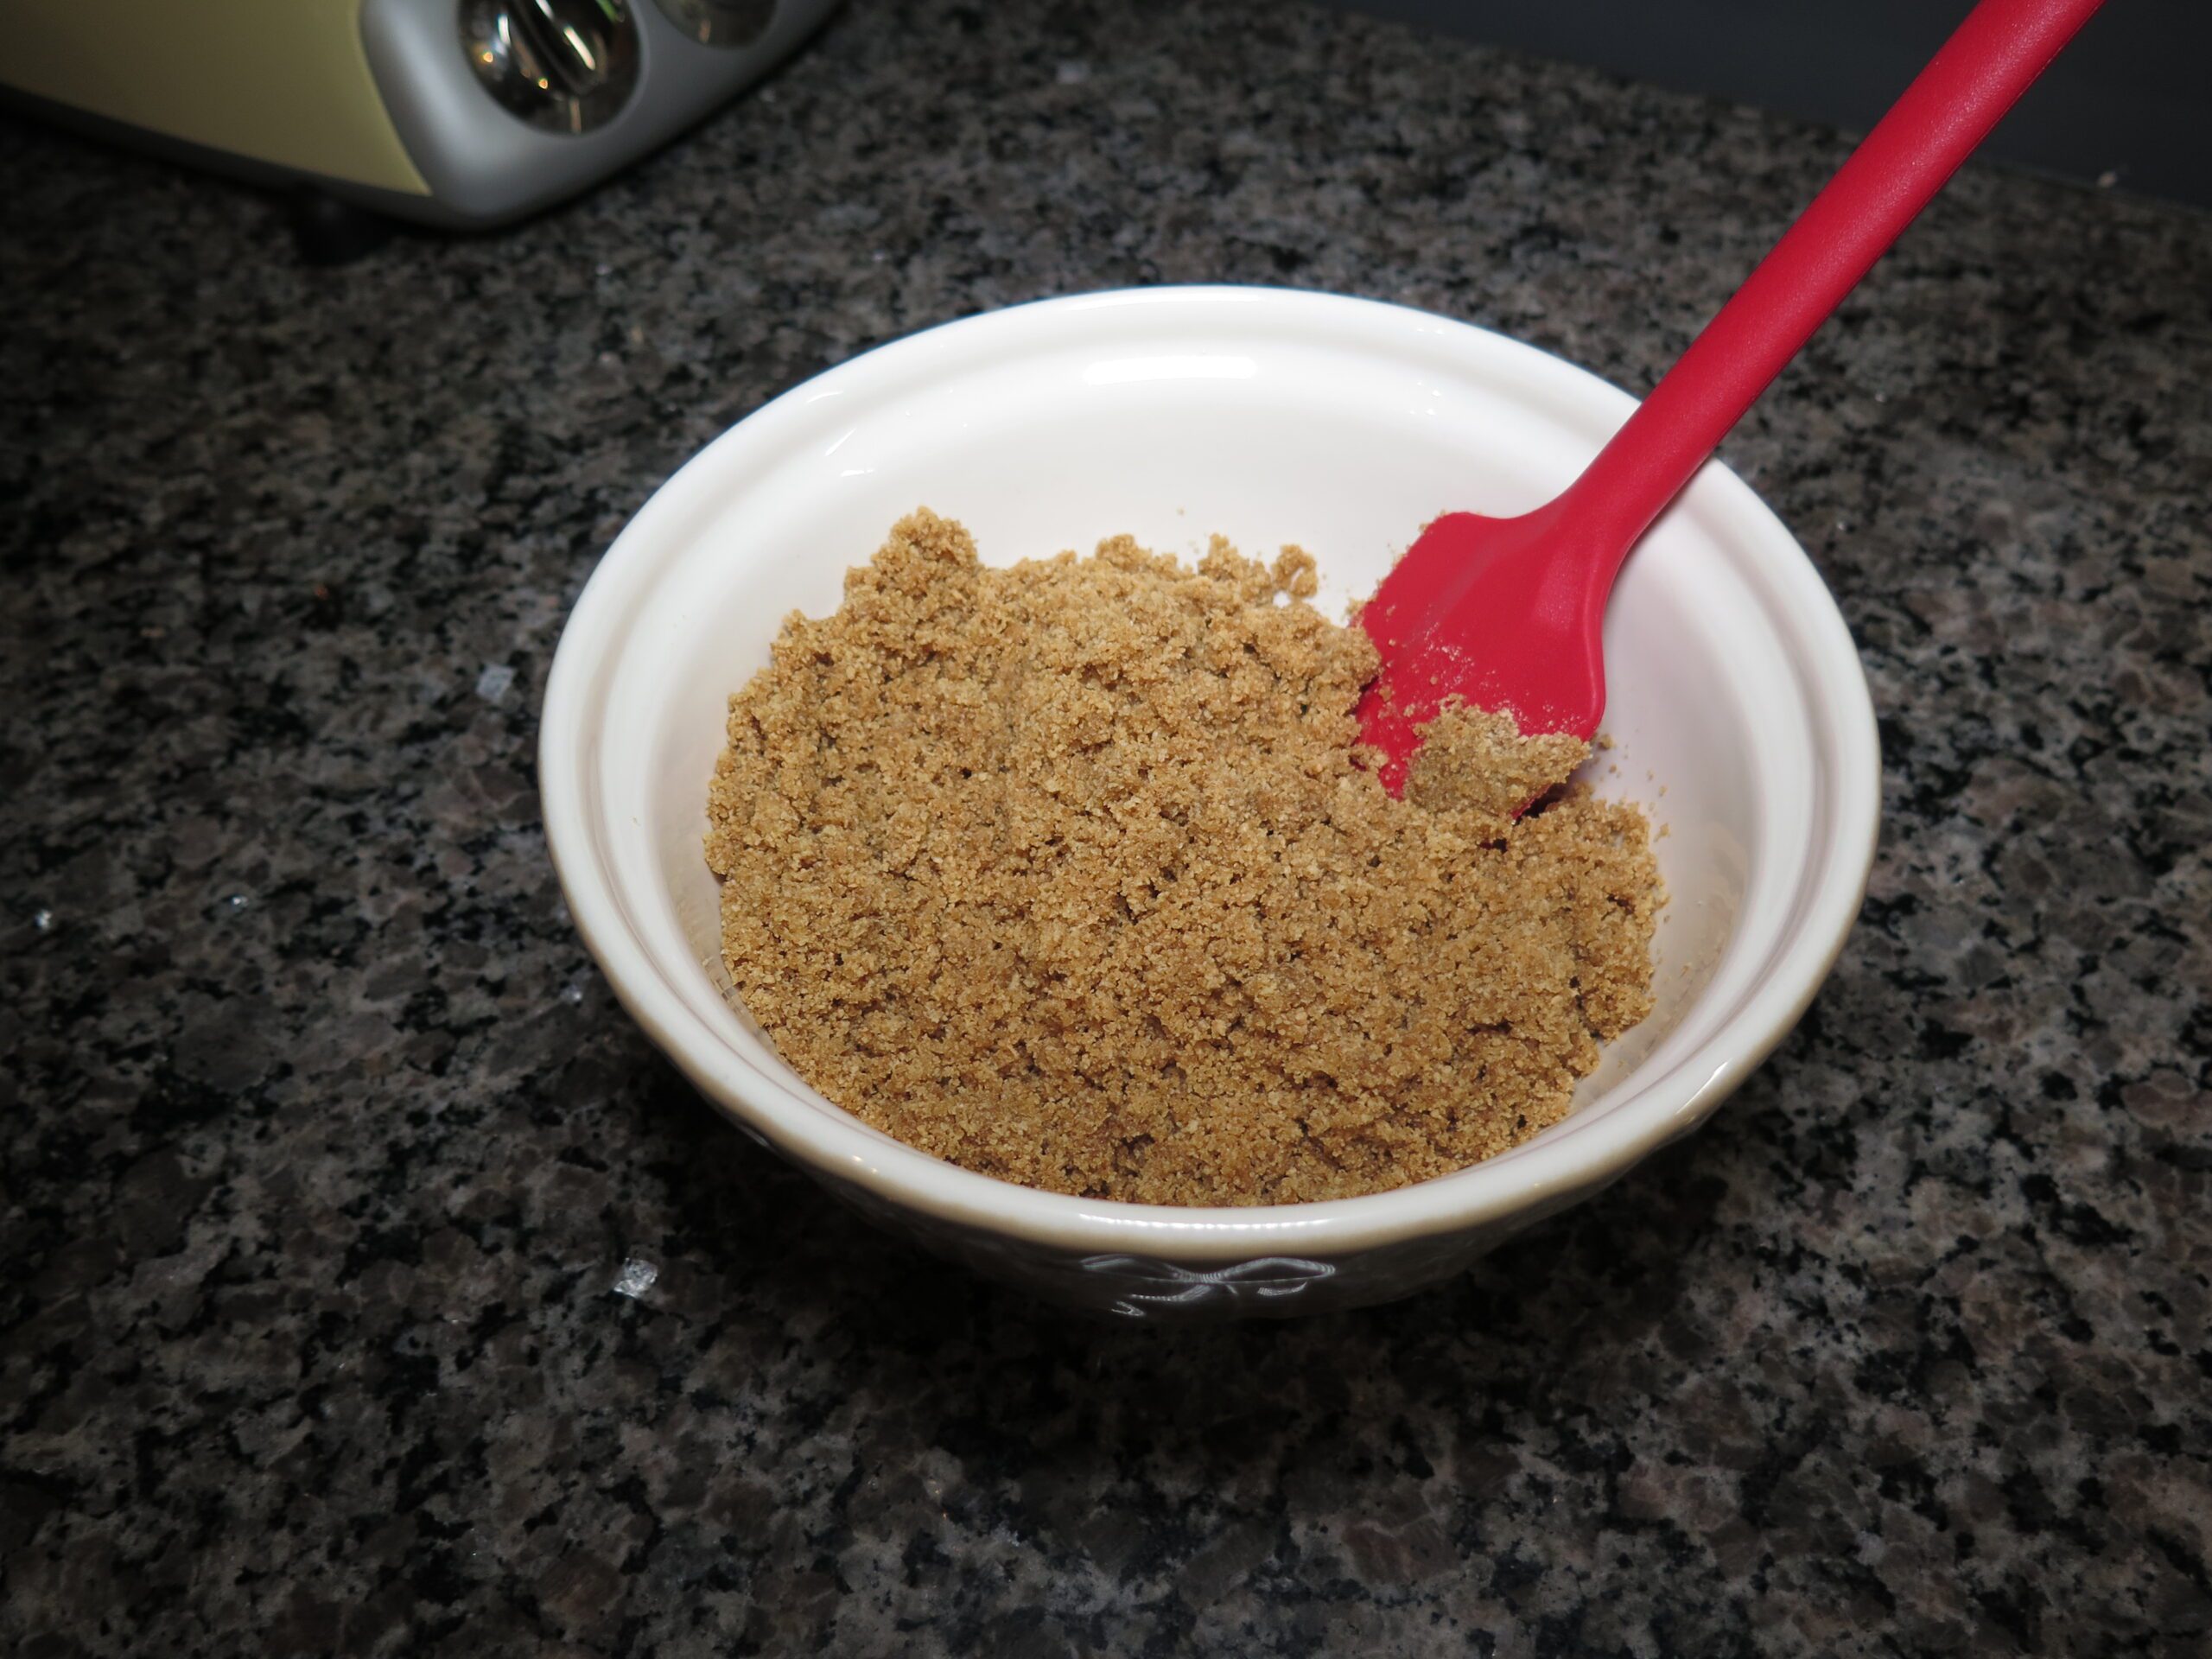 Graham cracker crust ready to be used